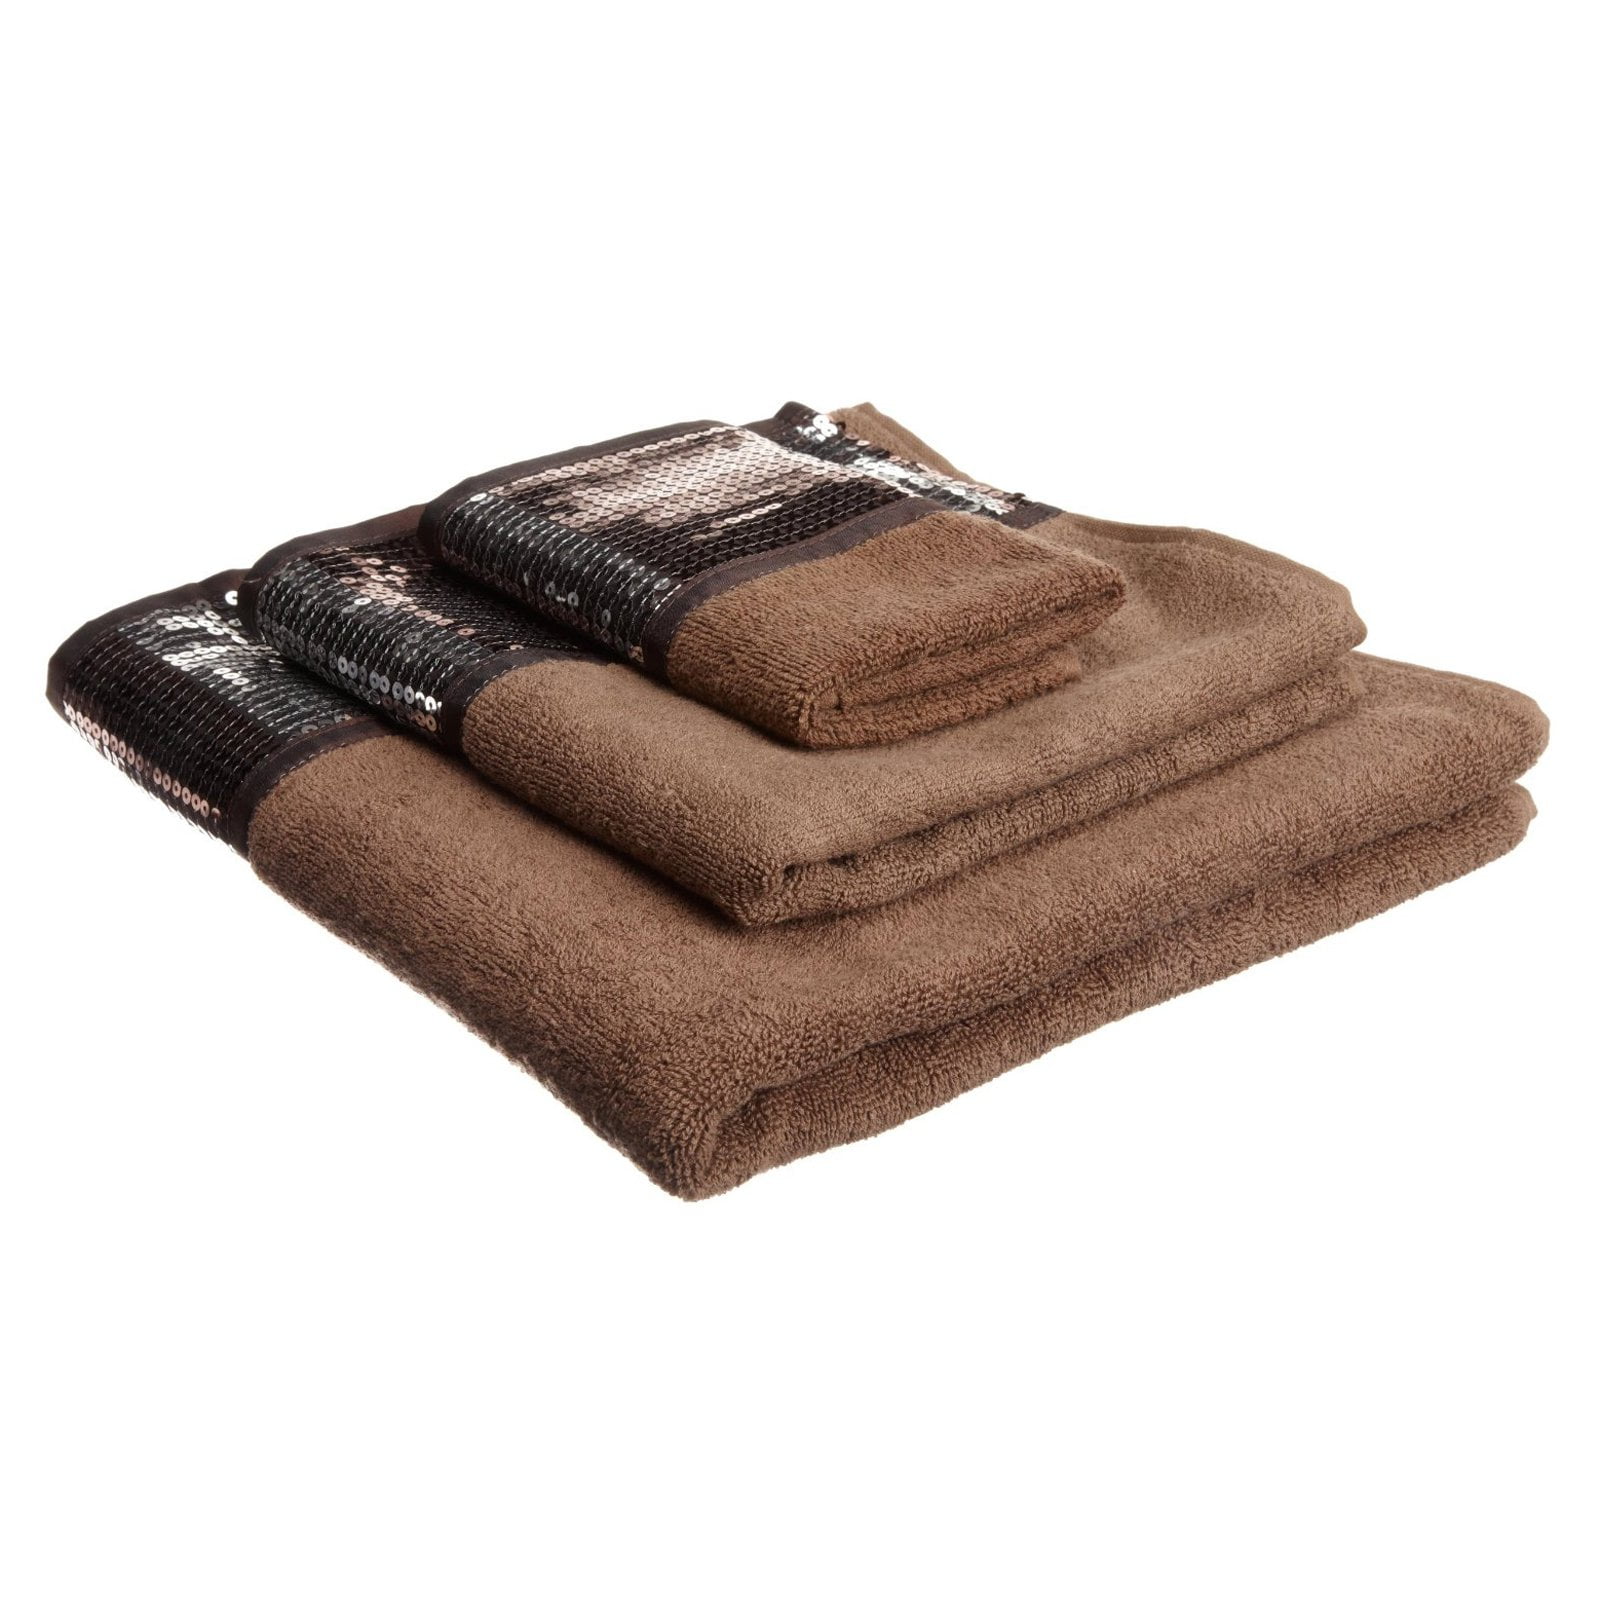 Popular Bath Products Zambia 3 PC Towel Set Brown for sale online 